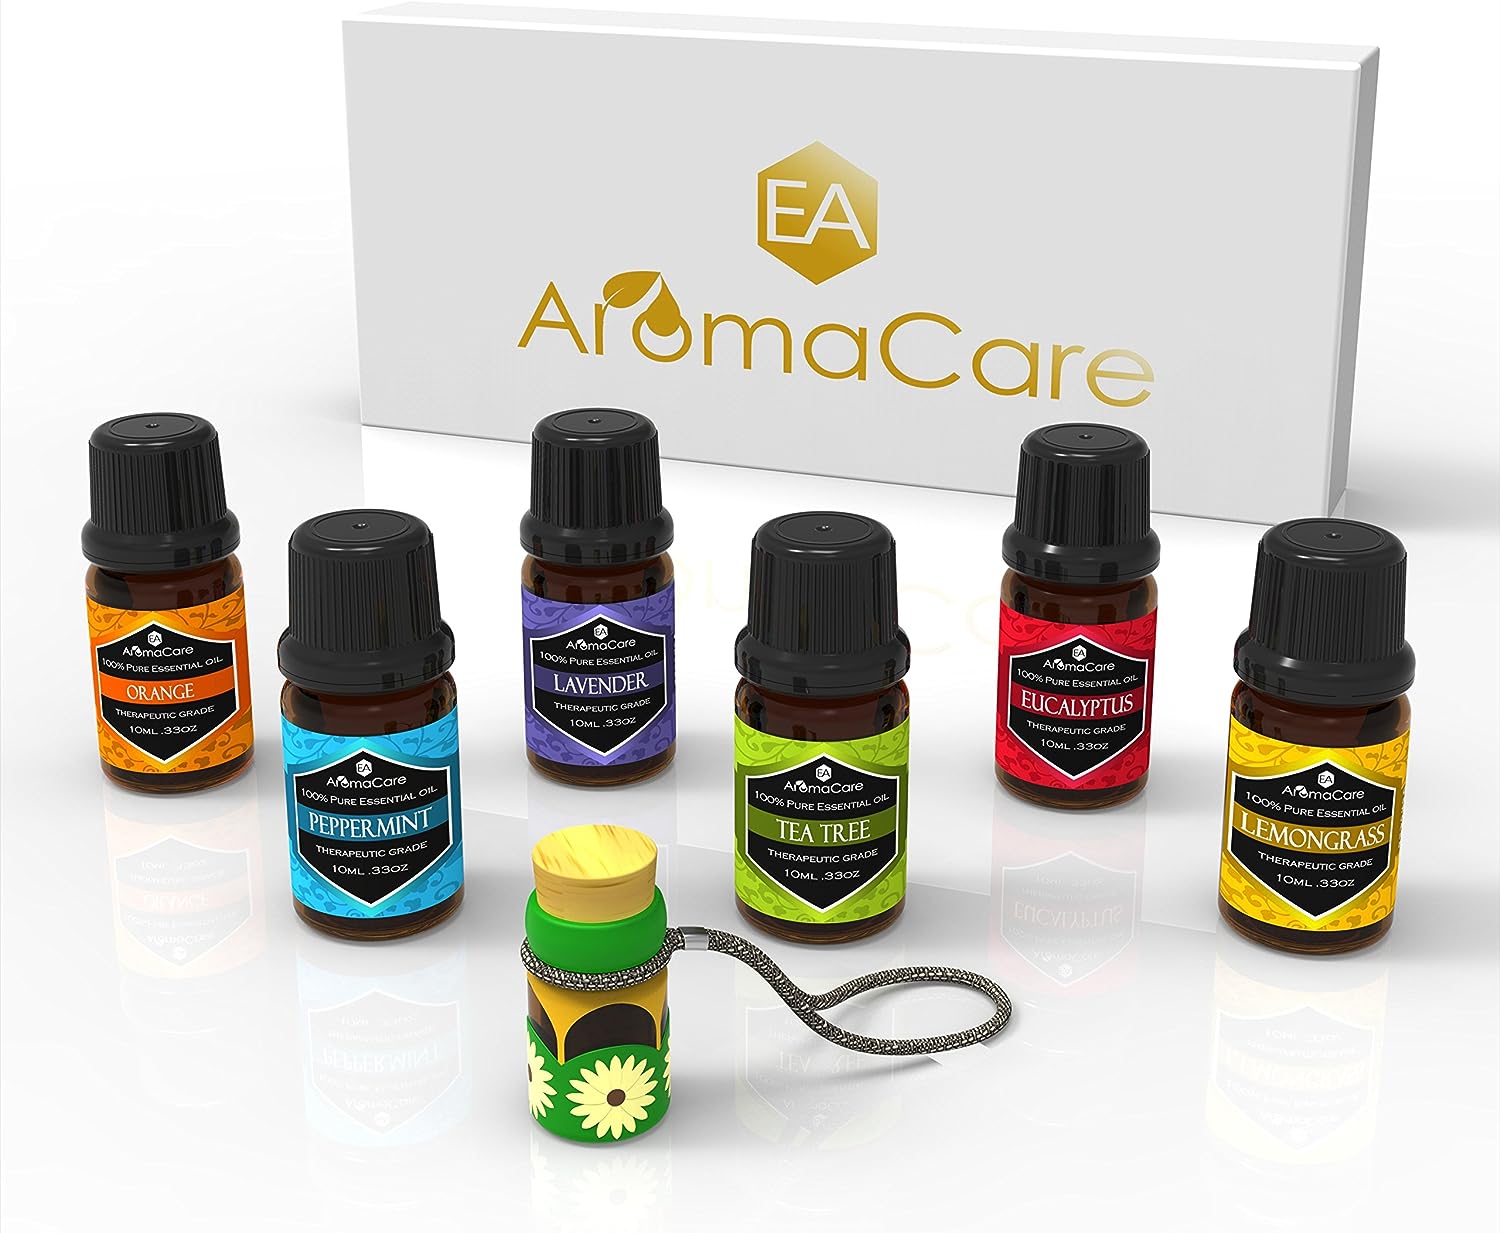 Aromatherapy Essential Oils Gift Set in a EXCLUSIVE WHITE BOX (Lavender, Peppermint, Lemongrass, TeaTree, Eucalyptus, Bergamot) FREE ebook and Essential Oil Pendant